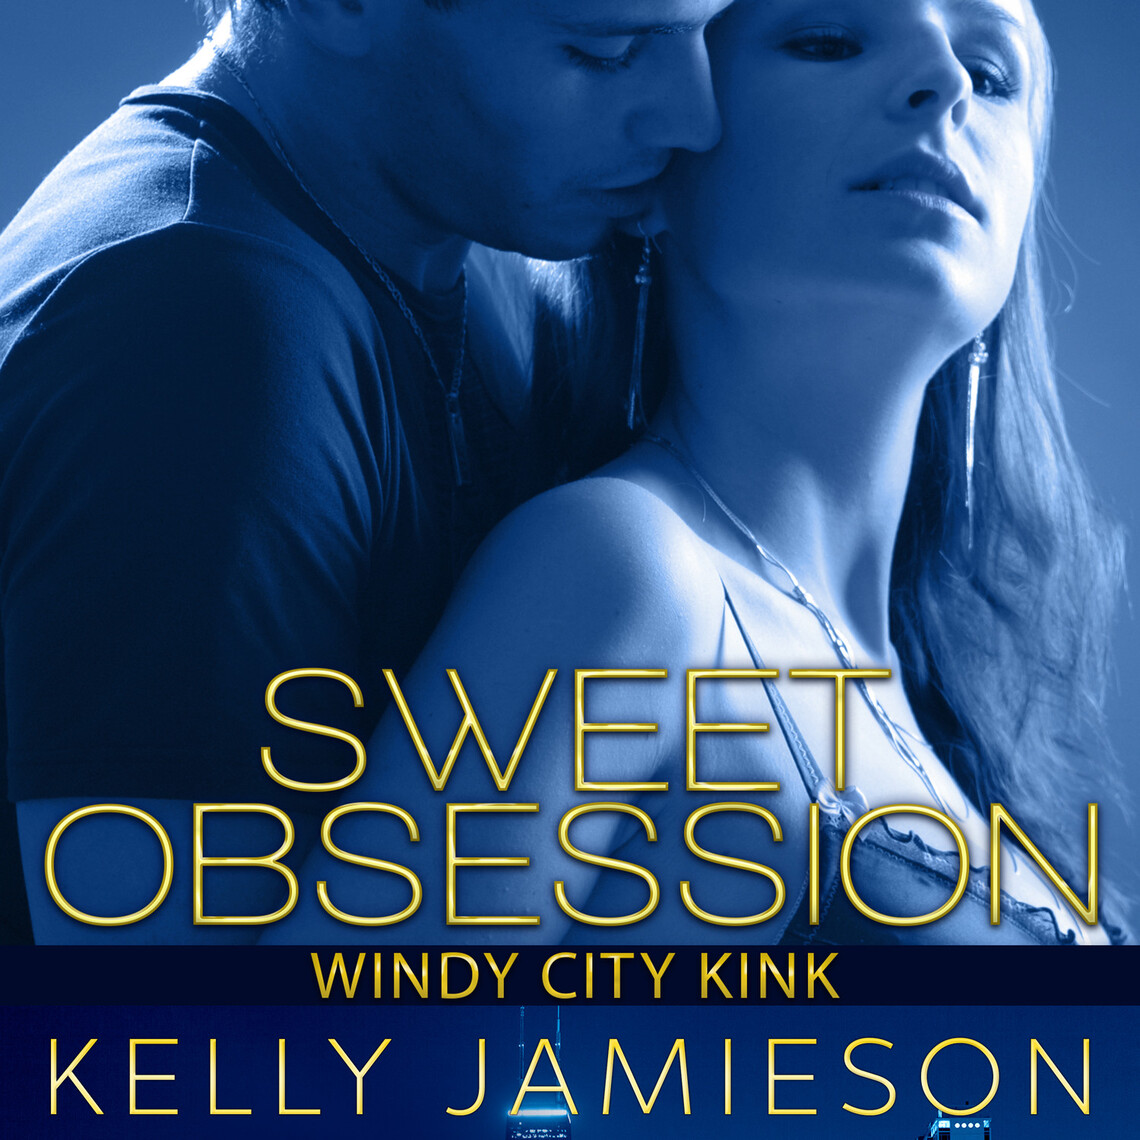 Sweet Obsession by Kelly Jamieson photo